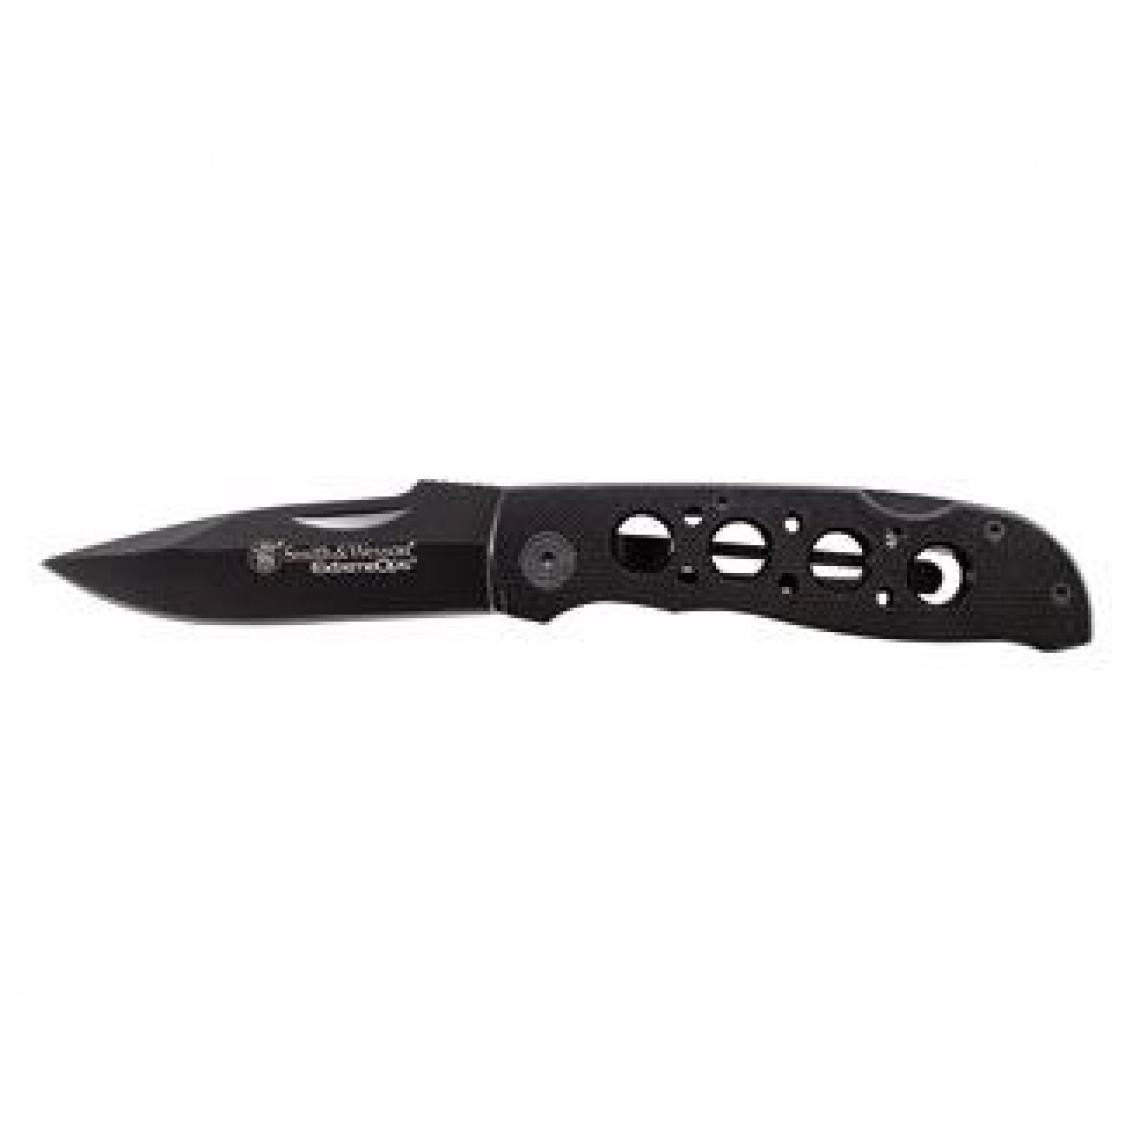 Smith & Wesson - Smith & Wesson FOLDING EXTREME OPS BLACK CK105BKEU - Outils de coupe